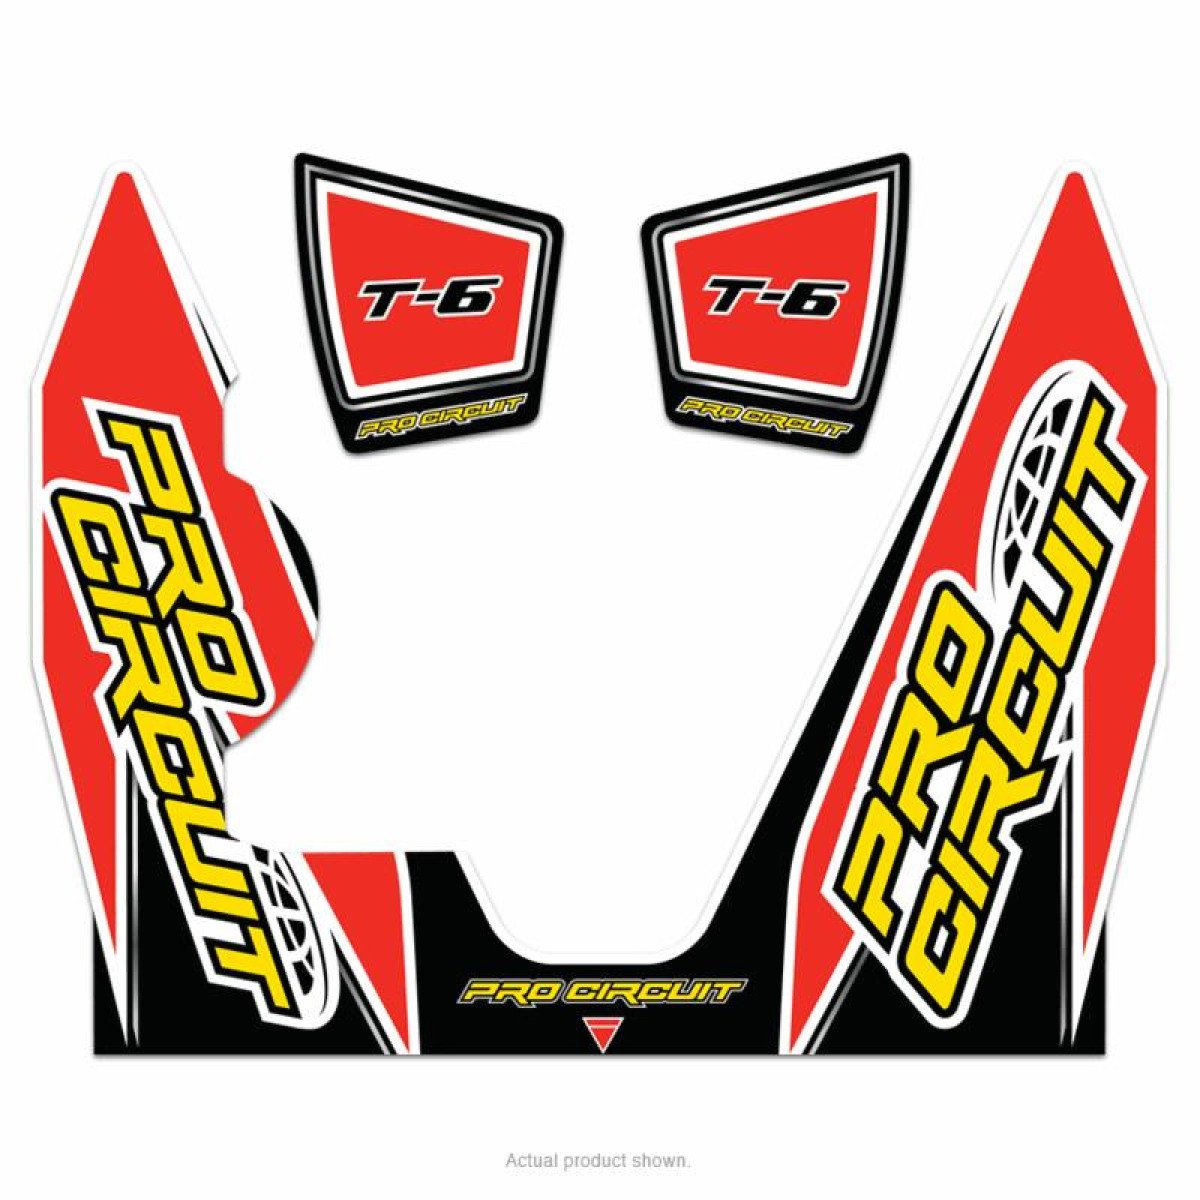 Pro Circuit Sticker Silencieux  for T-6, Yamaha YZ-F 450